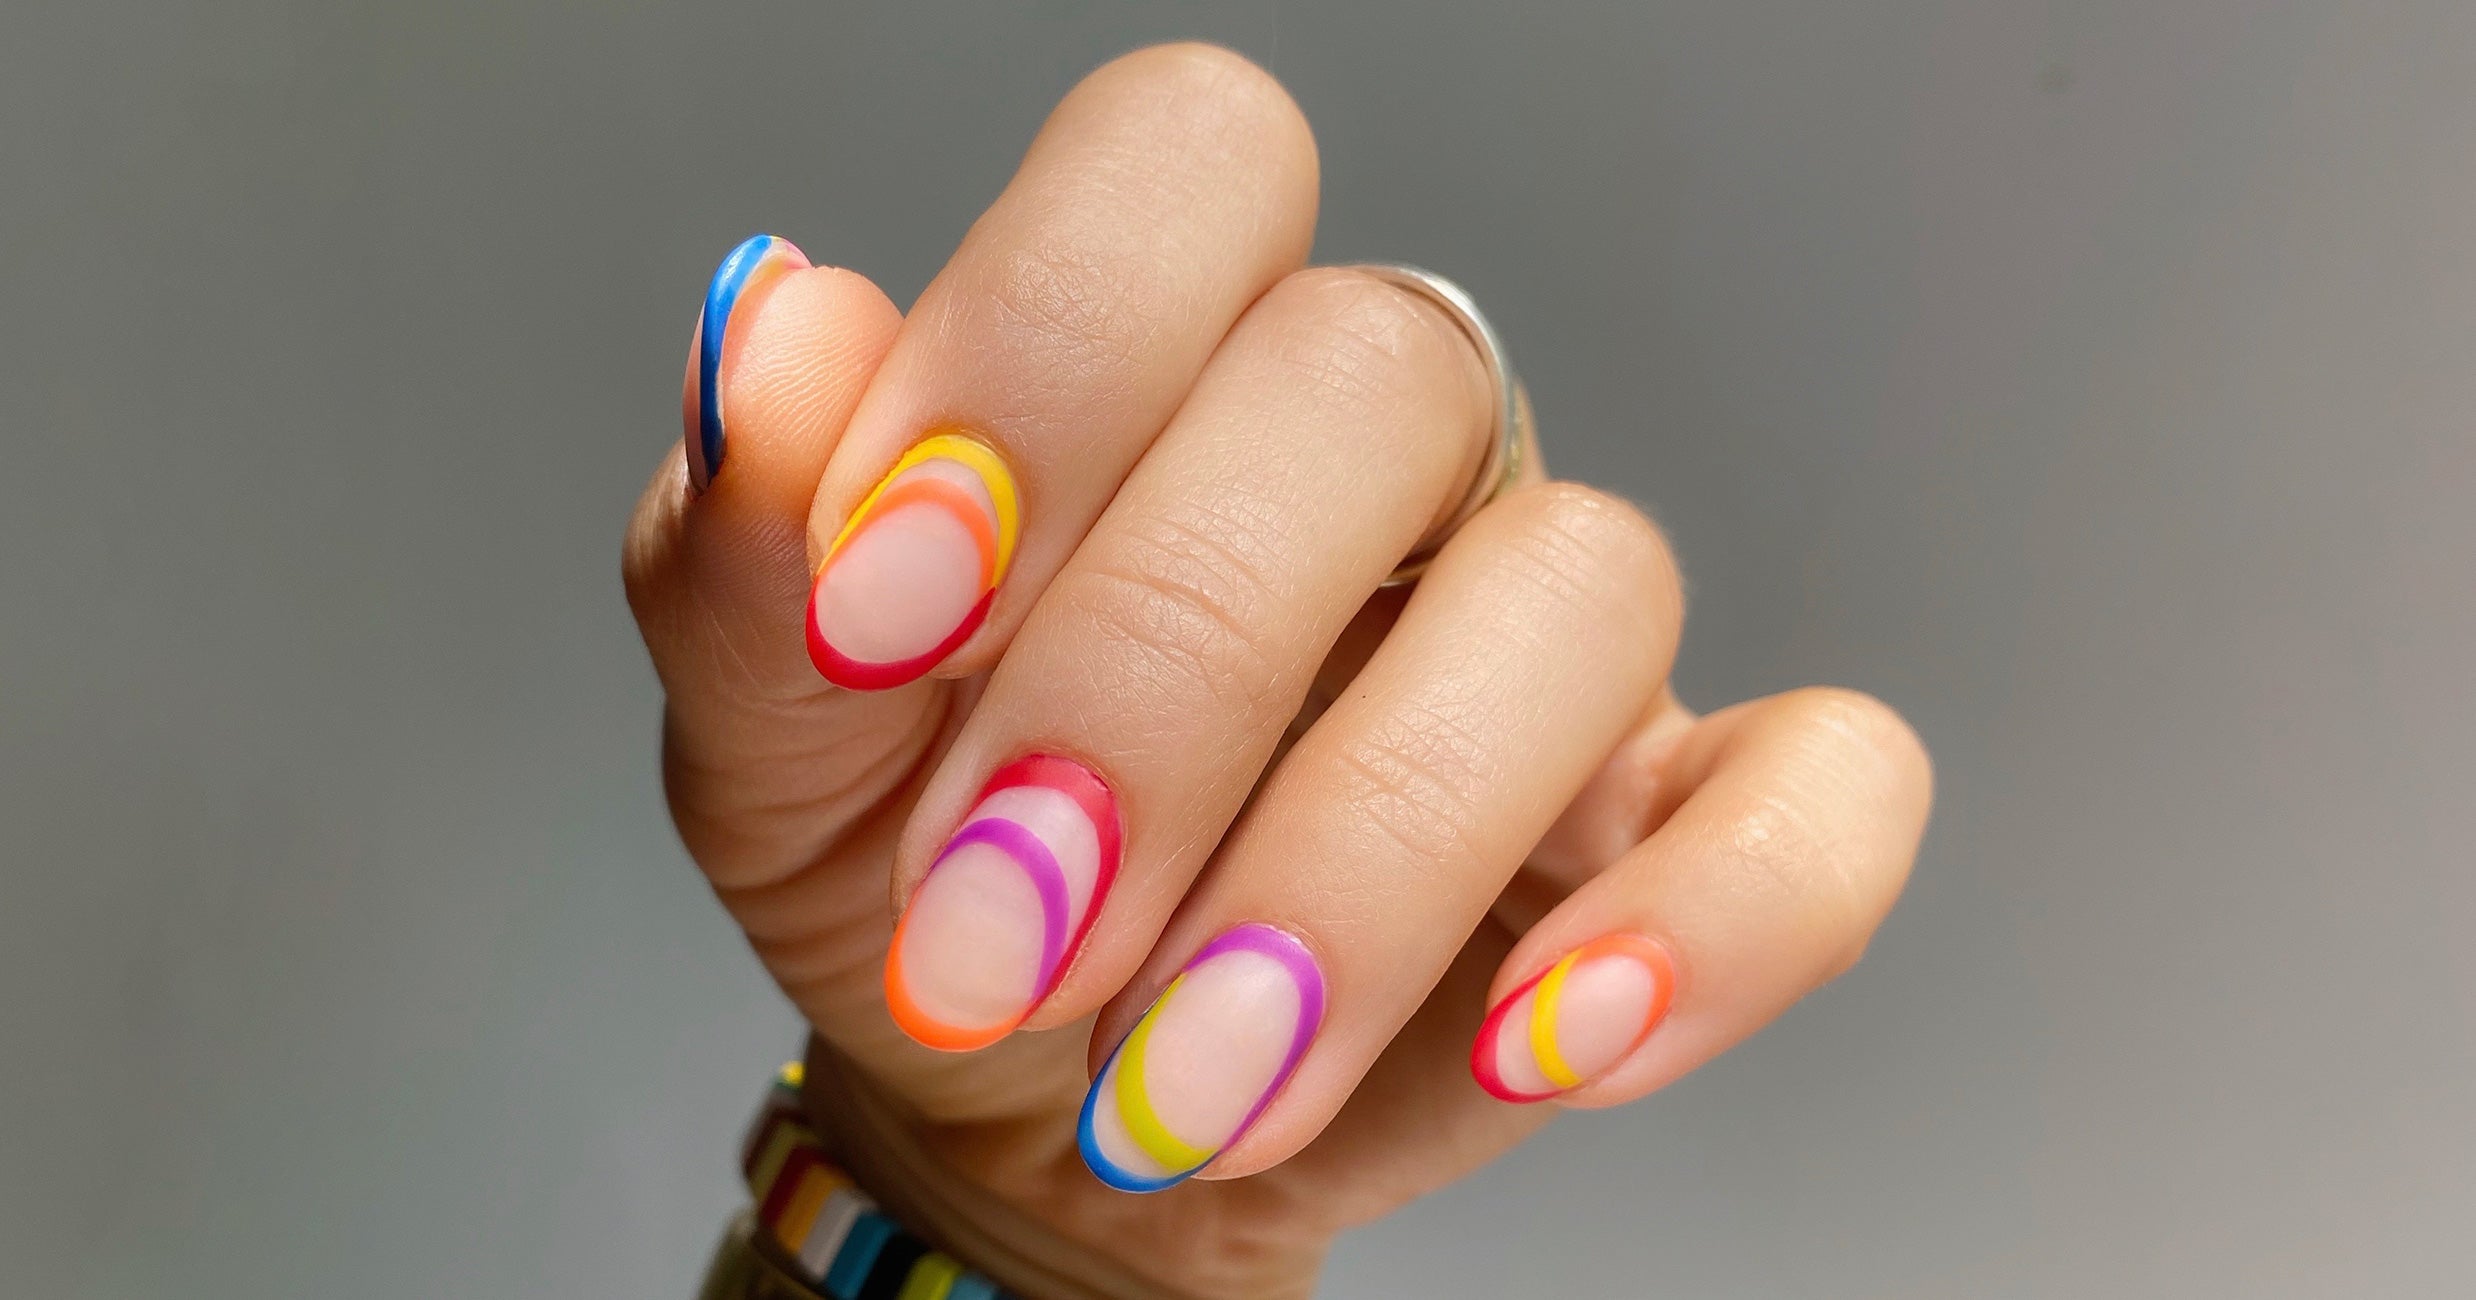 What is nail art?